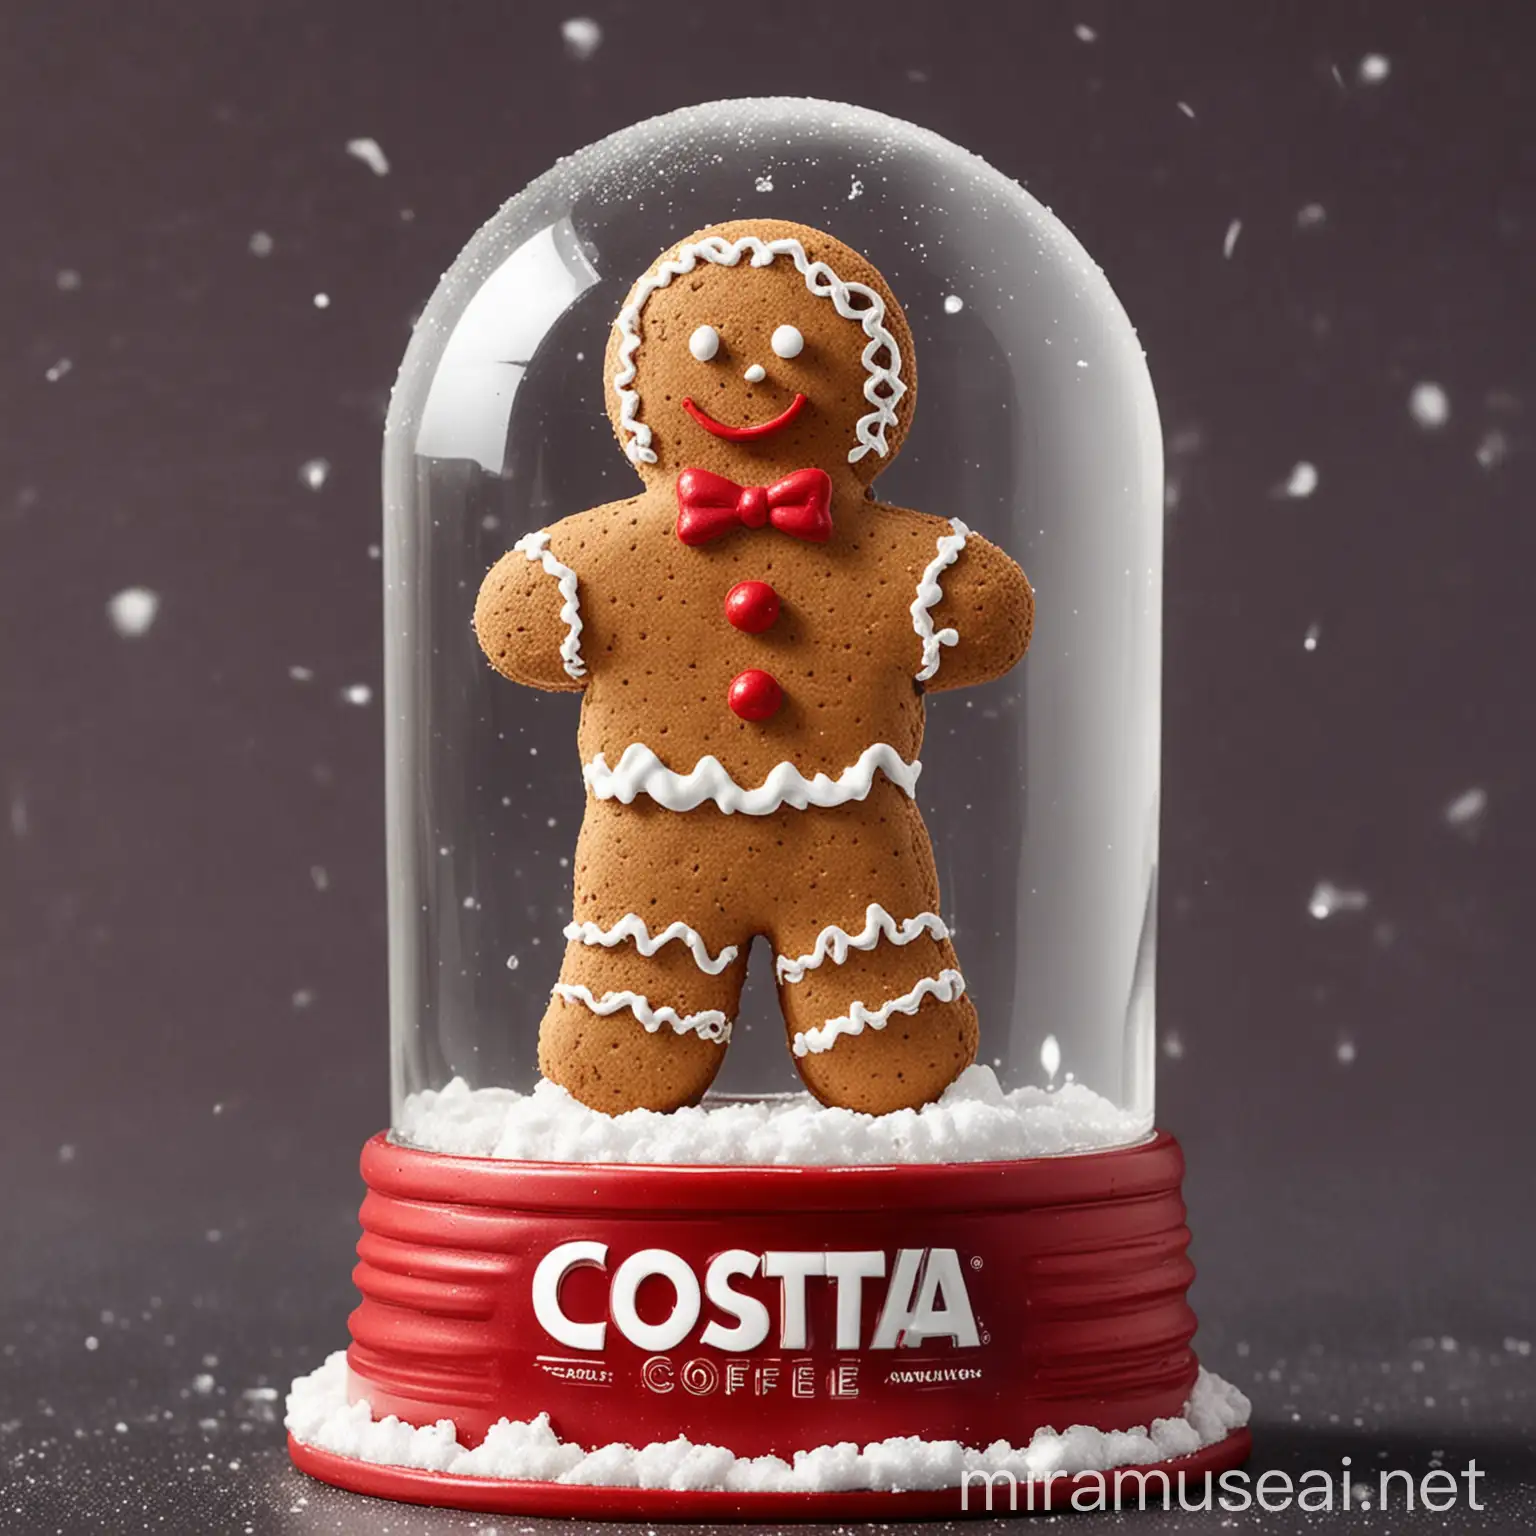 Create a Costa coffee themed gingerbread man sat on top of a snowglobe